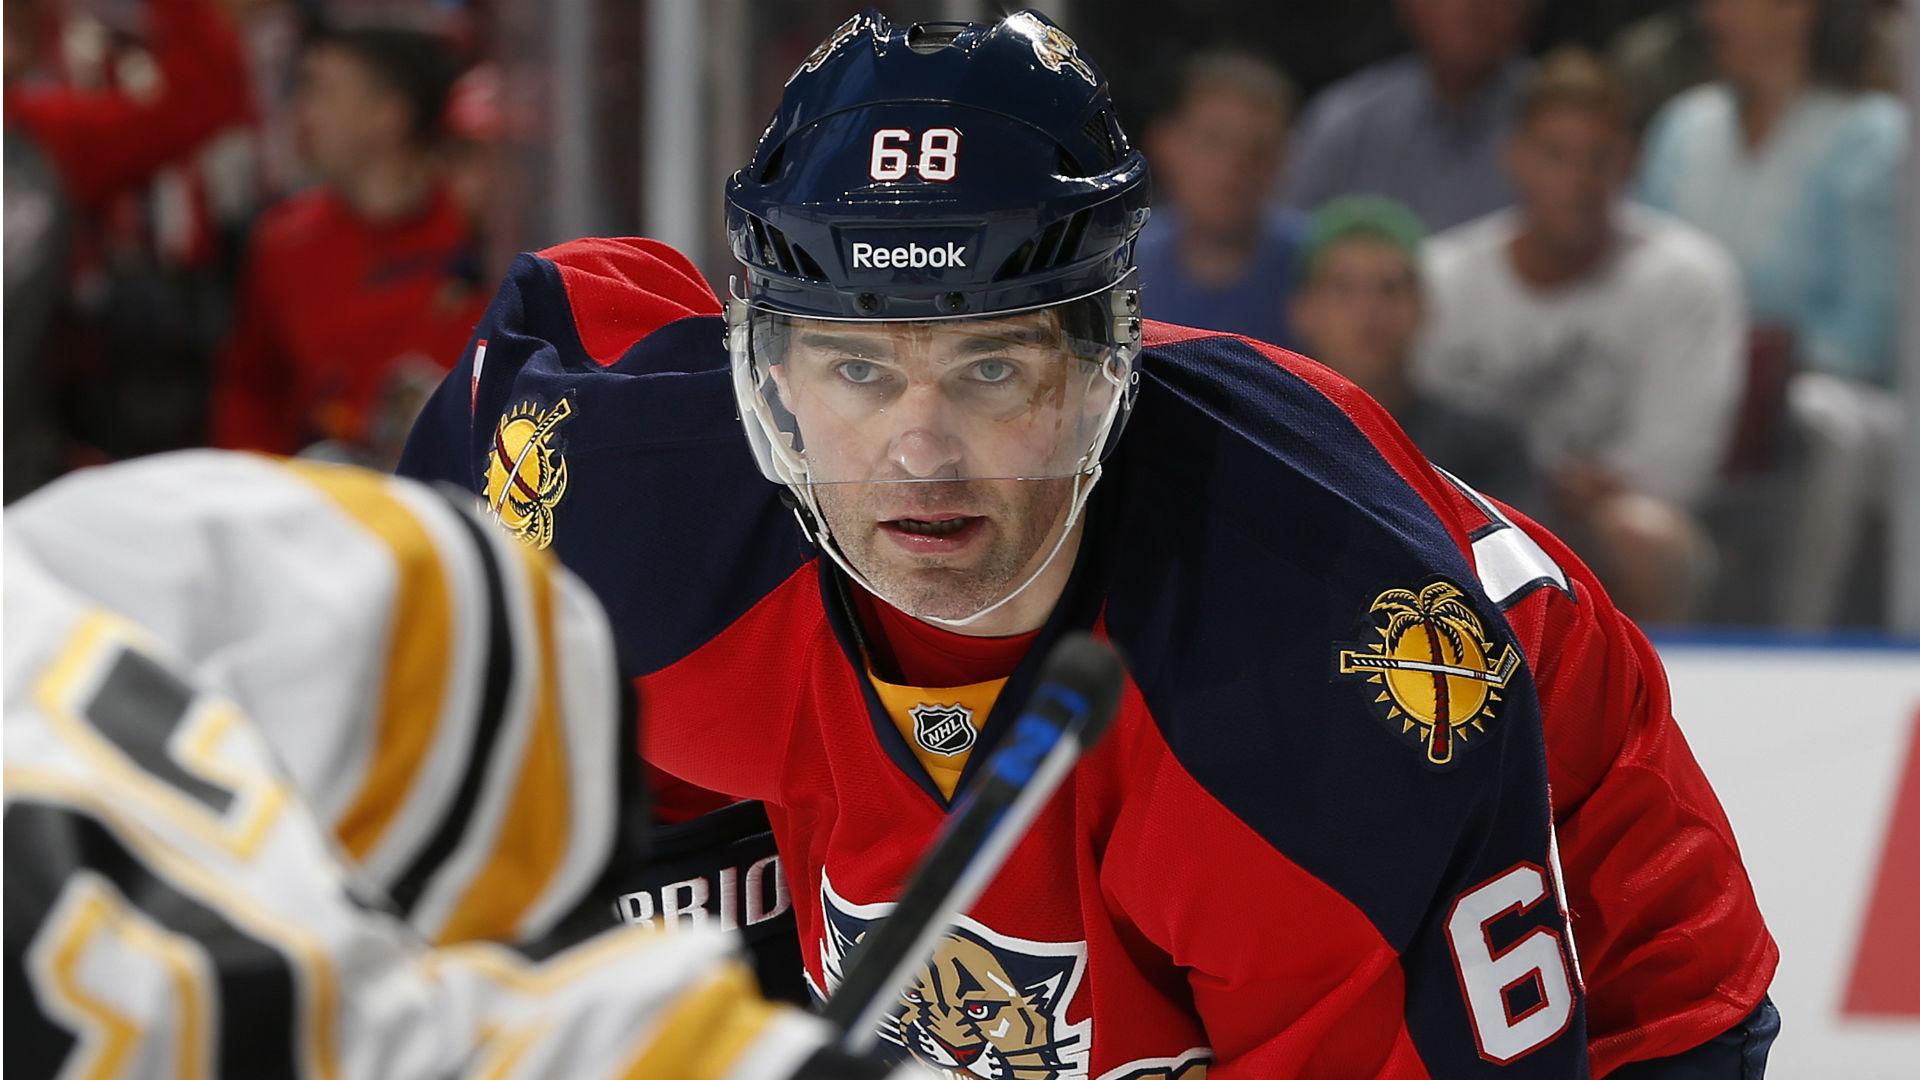 Panthers Retain Jaromir Jagr With One Year Deal